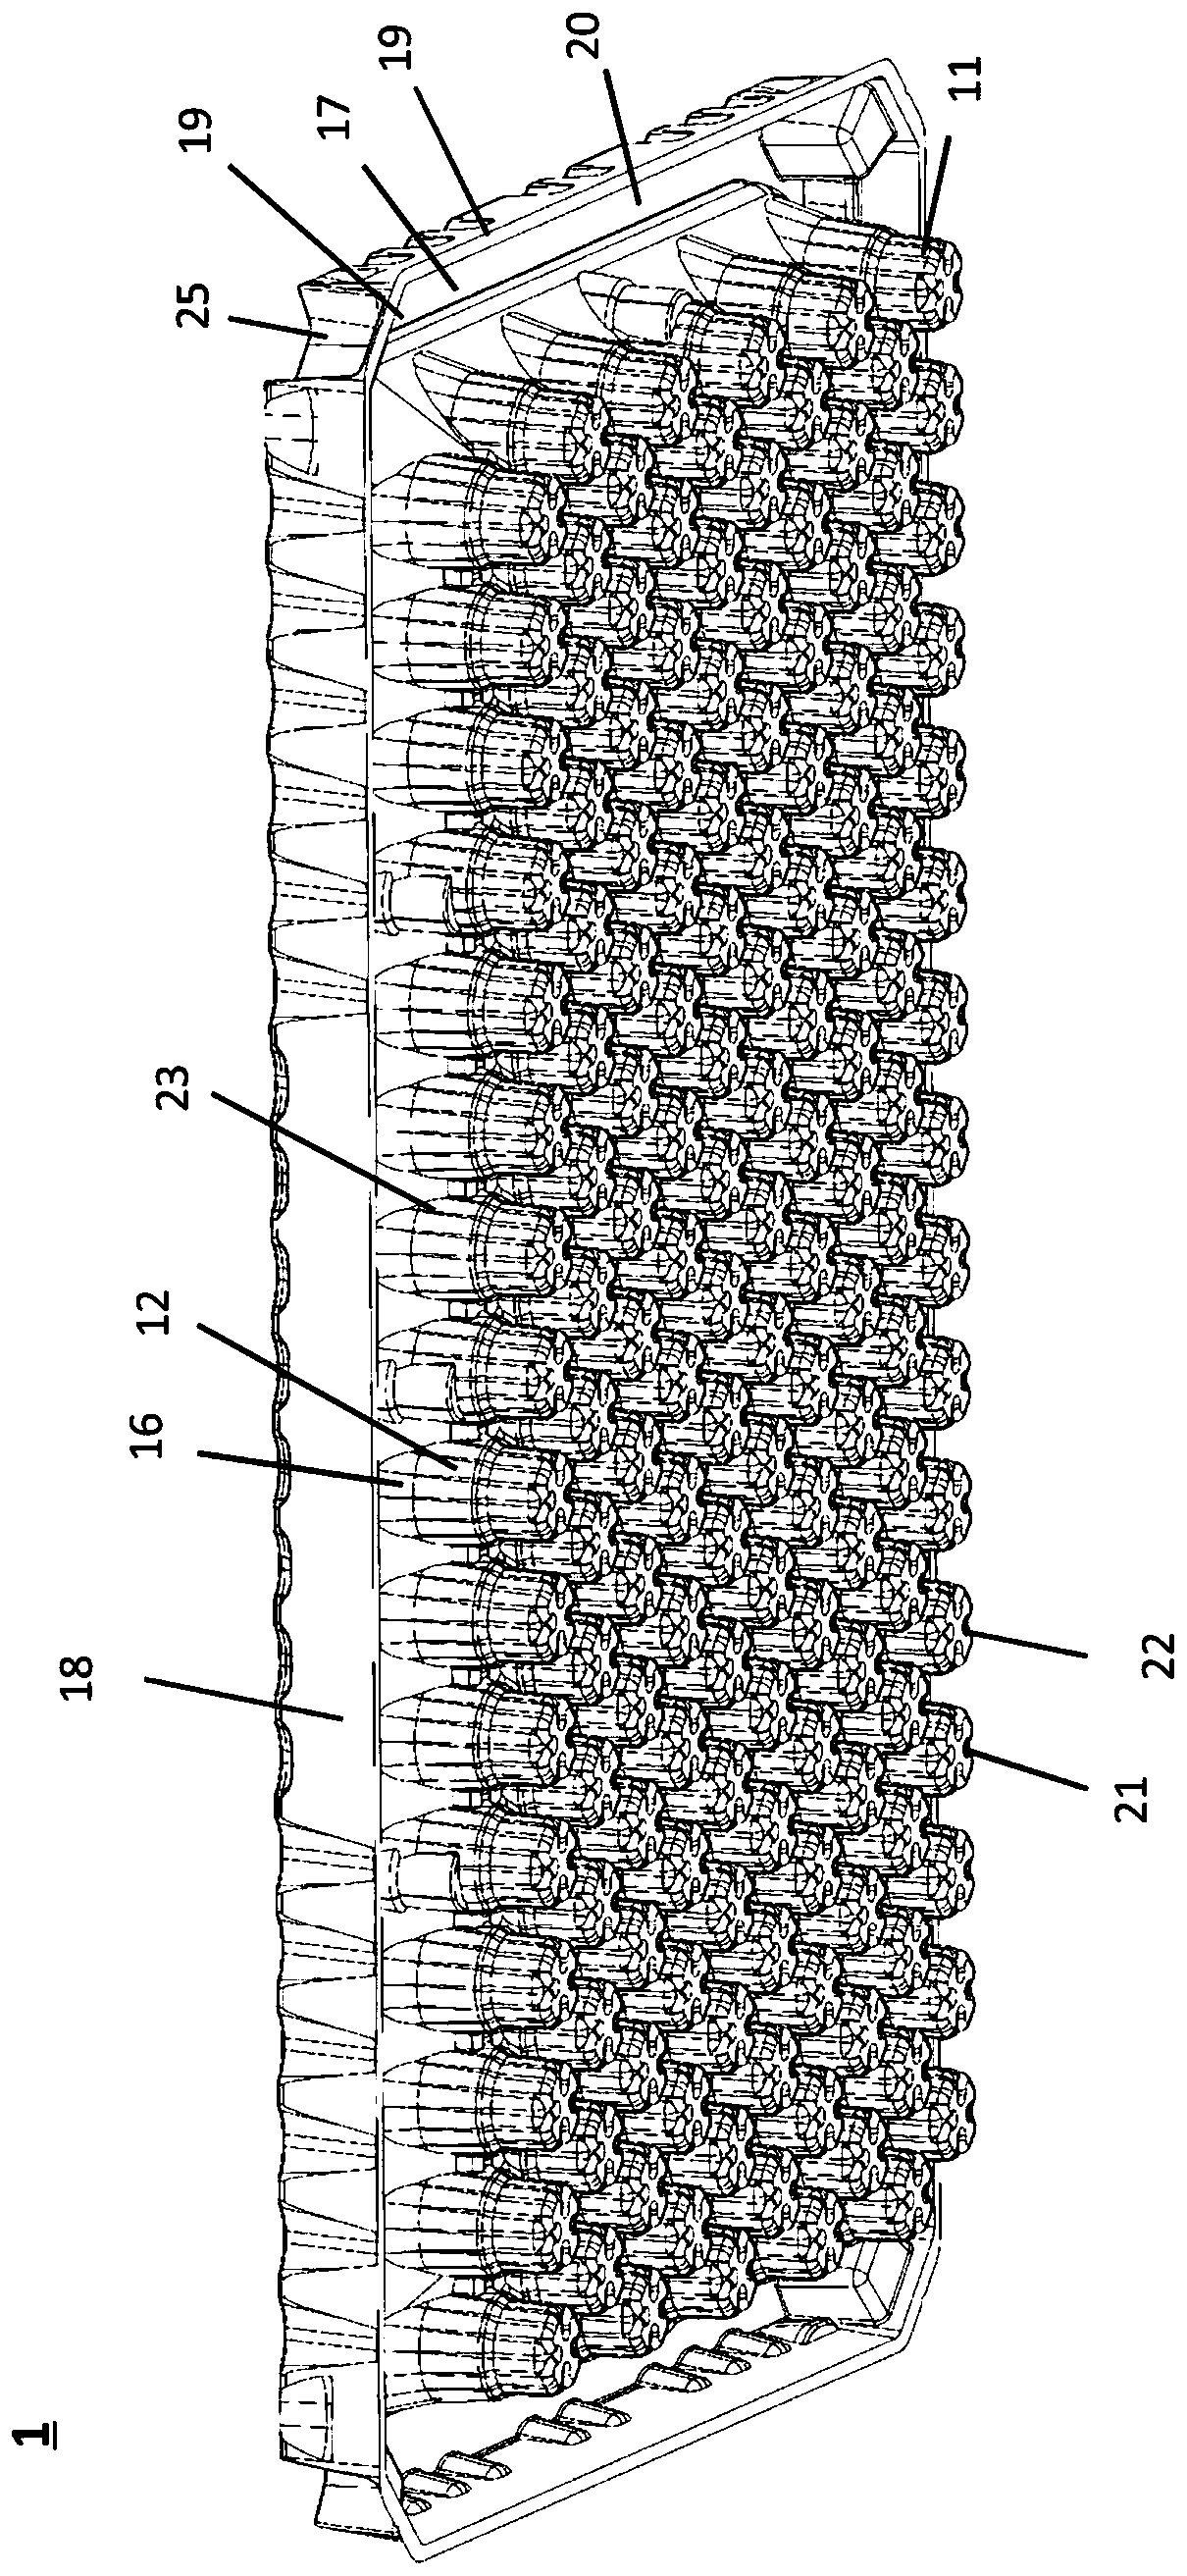 Transport unit and packaging structure for a plurality of containers for substances for pharmaceutical, medical or cosmetic uses